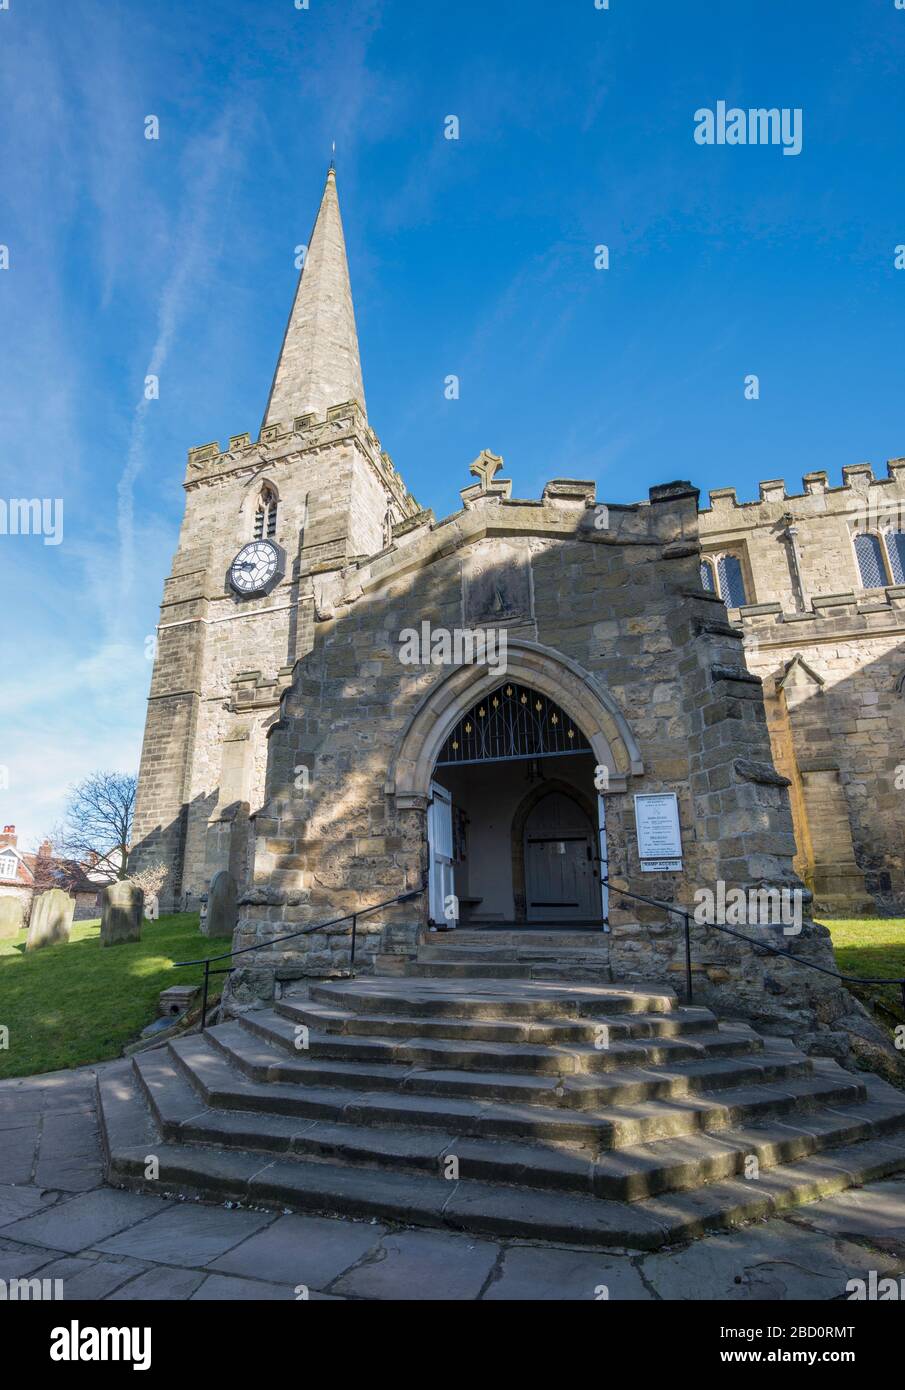 The entrance porch, tower and spire of St Peter and St Paul's church in Pickering, North Yorkshire Stock Photo